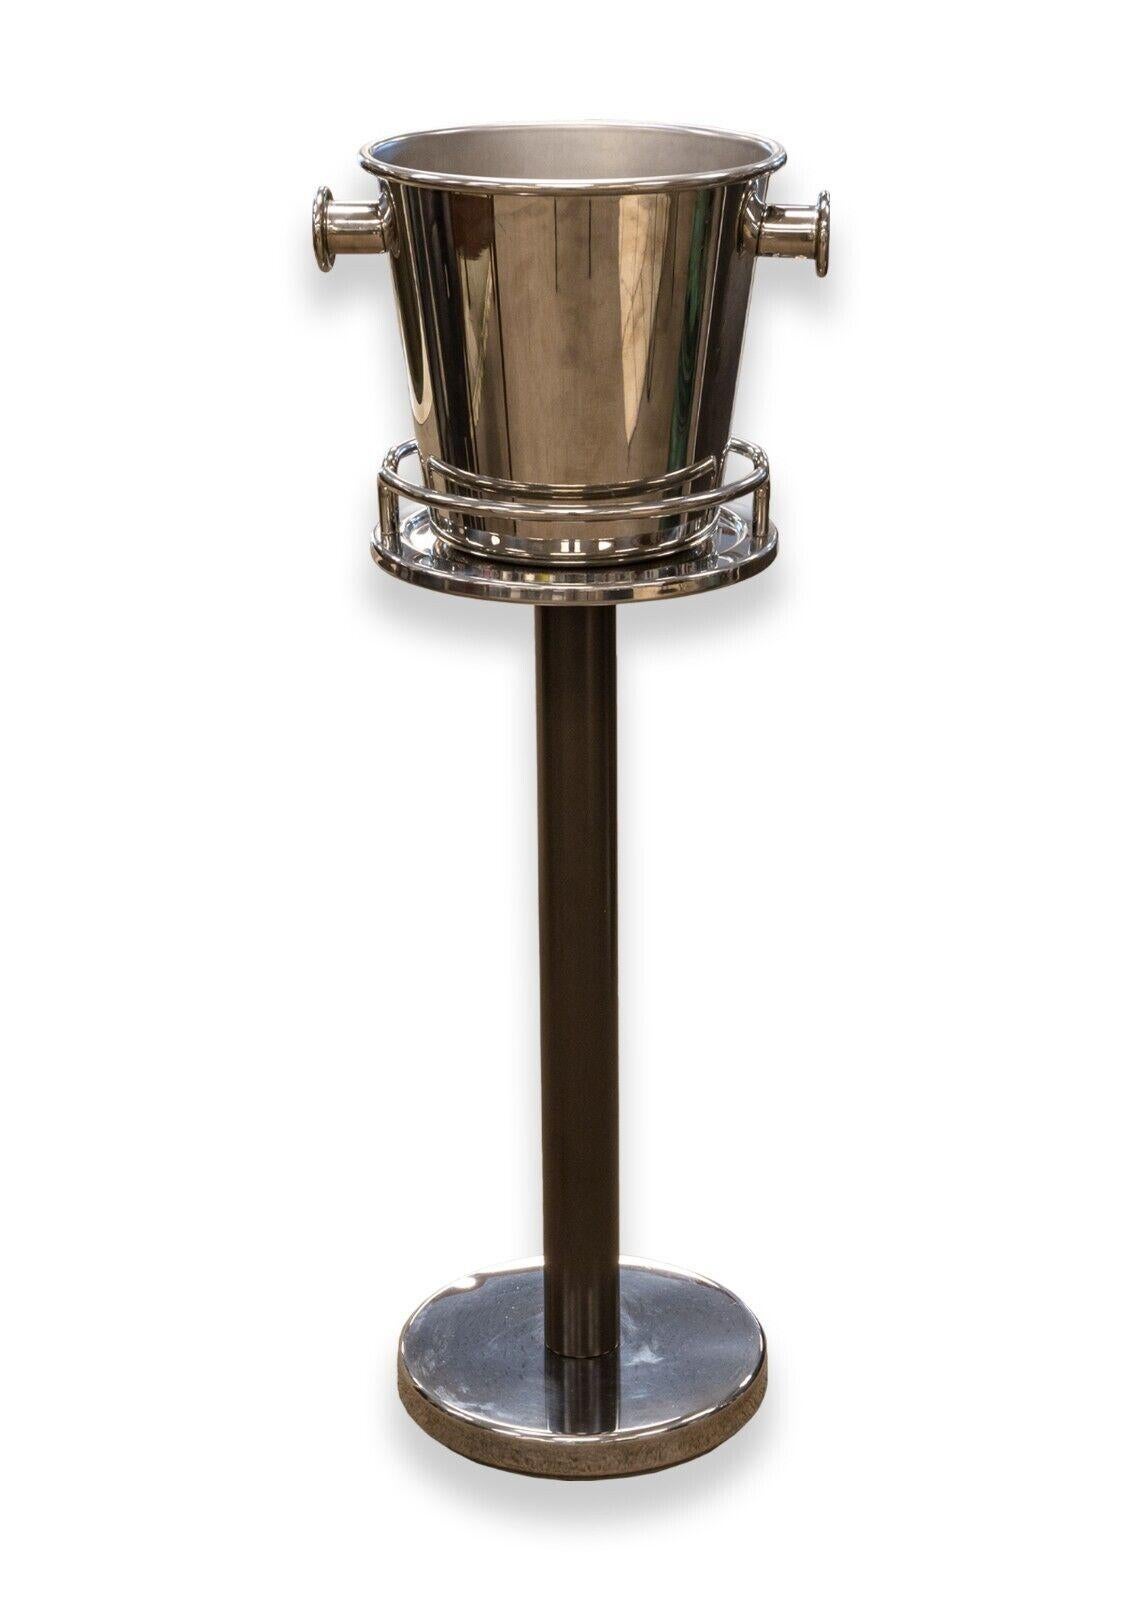 A contemporary modern Ettore Sottsass for Alessi chrome wine cooler and stand. A lovely freestanding bottle cooler from Alessi. A beautiful piece for any home bar or kitchen. This piece features a chrome metal construction, and a dark brown metal